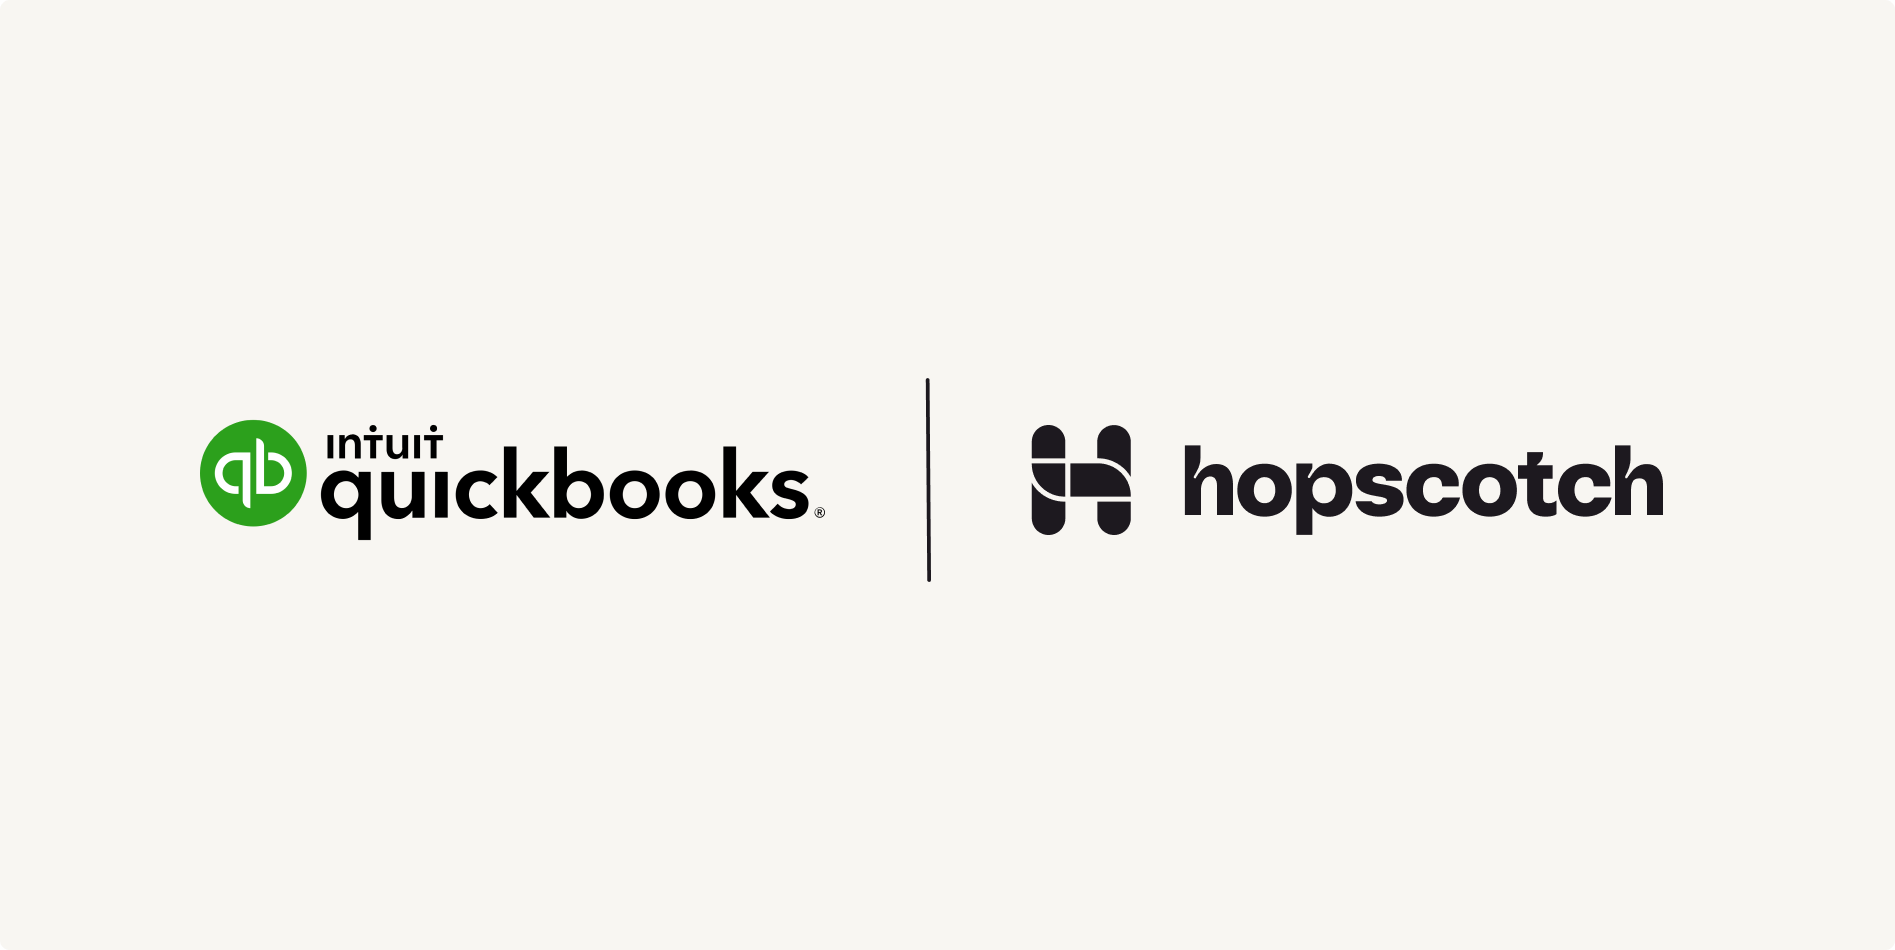 Intuit quickbooks and Hopscotch